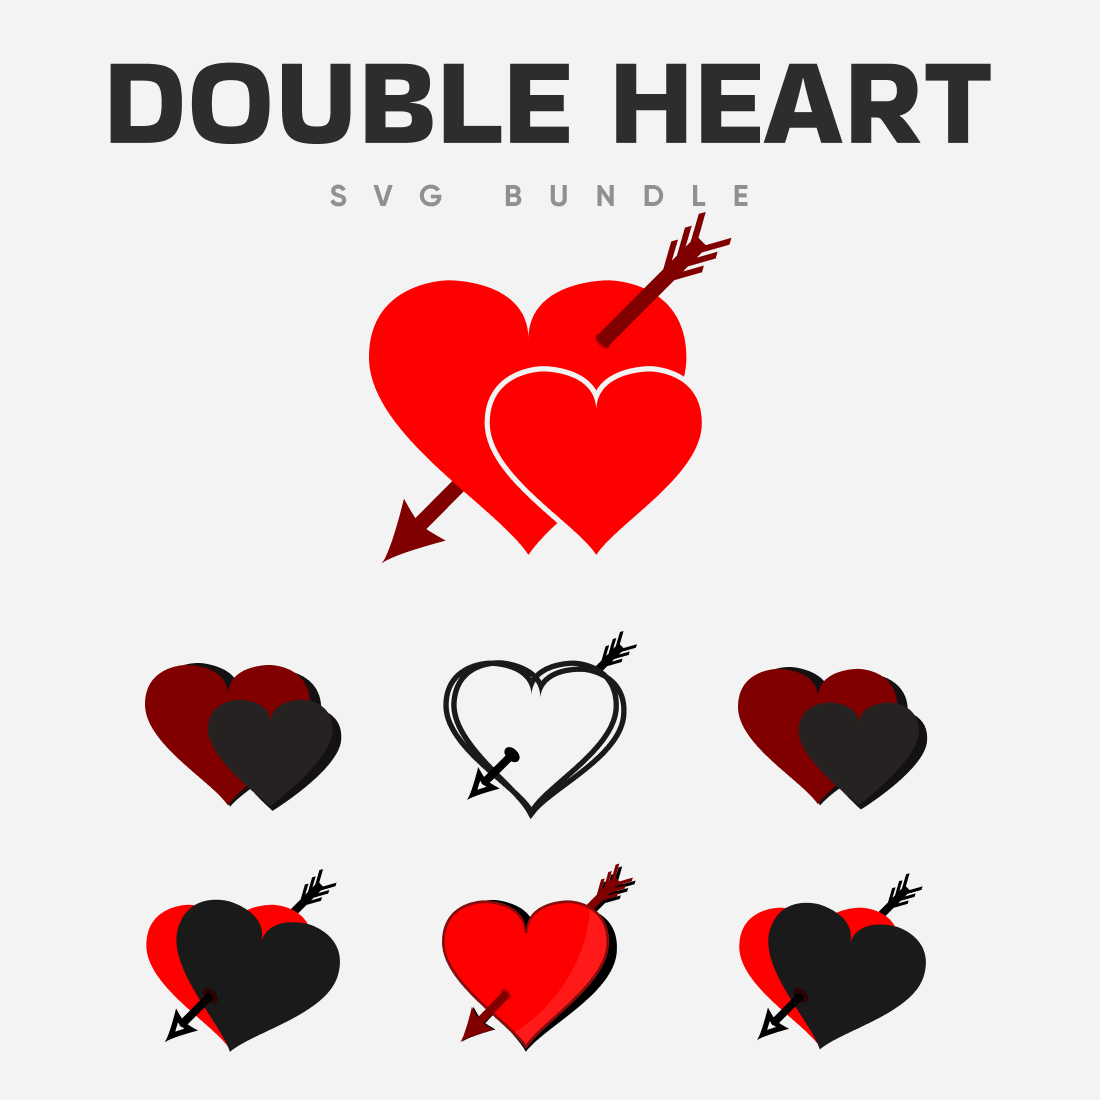 Double hearts connected by cupid's arrow.